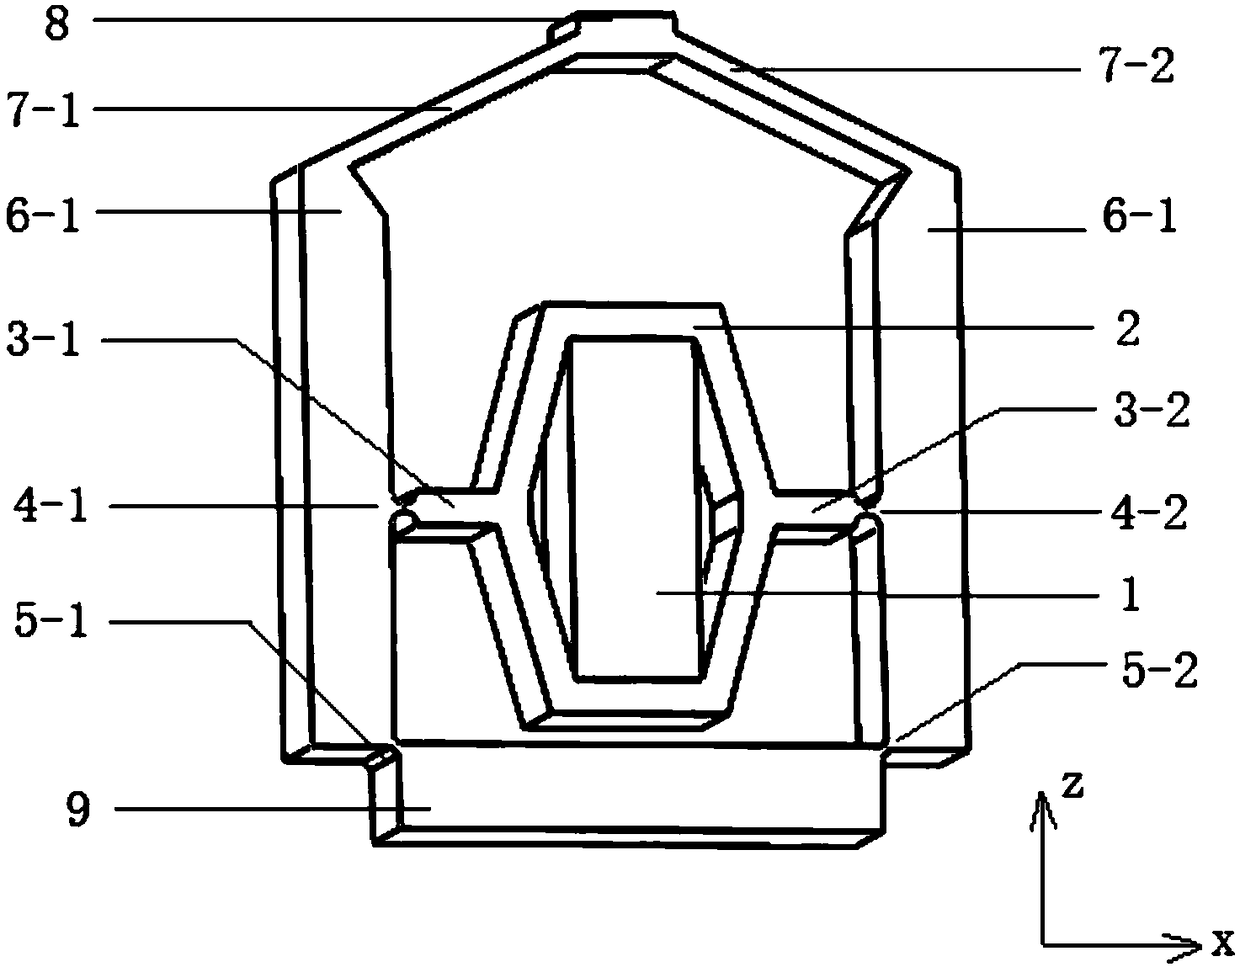 A Planar Three-Stage Amplifying Mechanism and Method Based on Rhombus Ring and Lever Principle